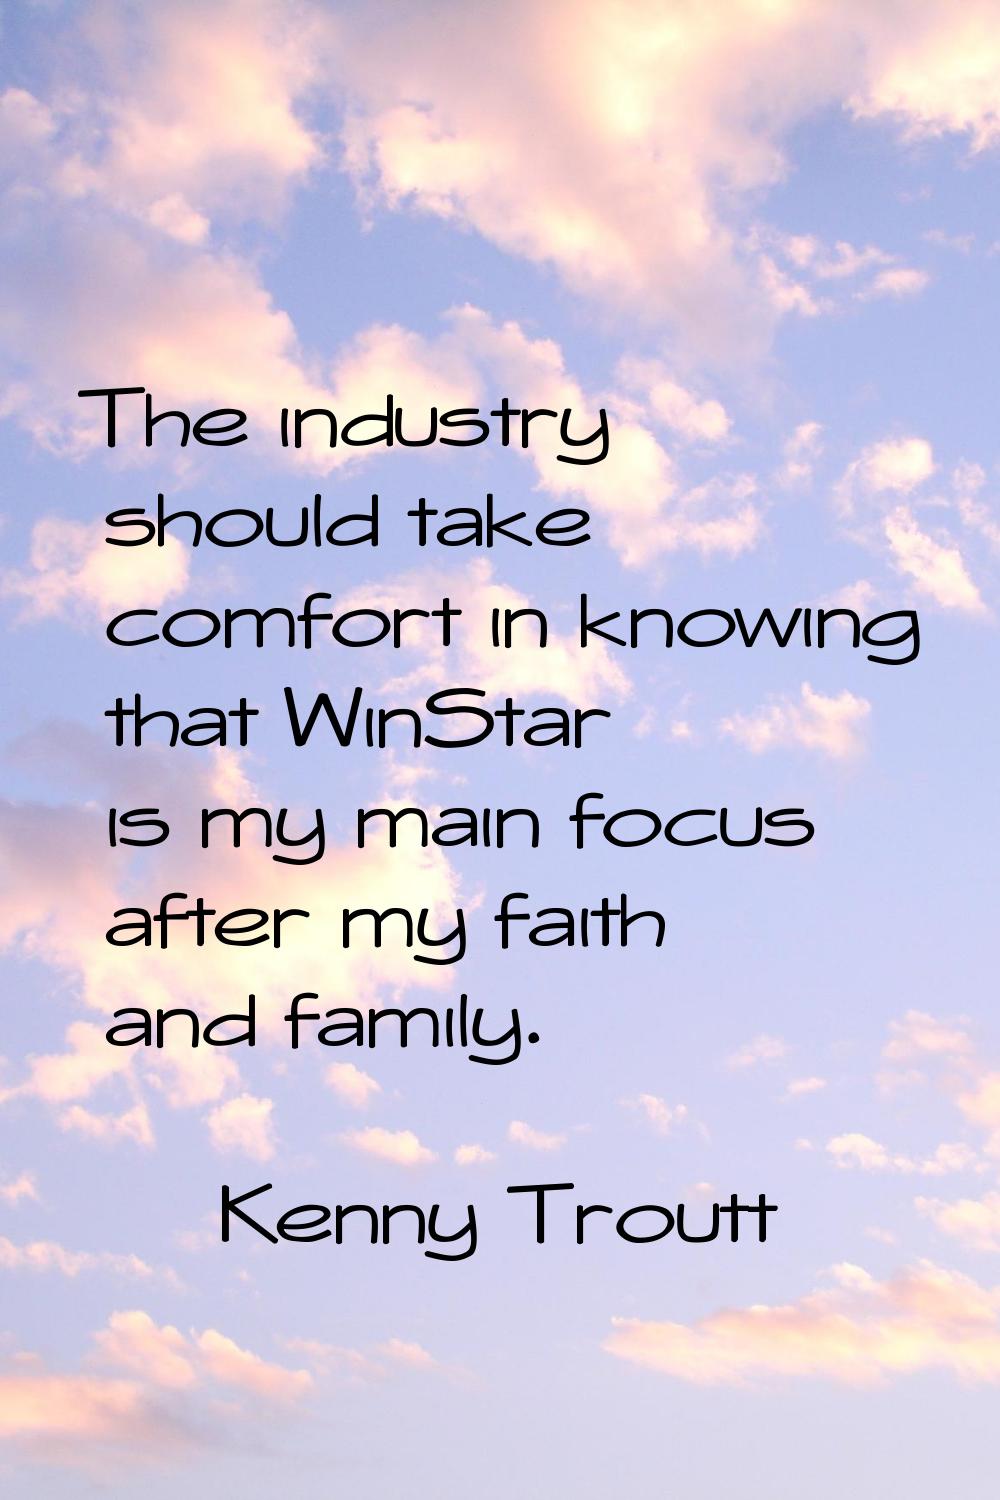 The industry should take comfort in knowing that WinStar is my main focus after my faith and family